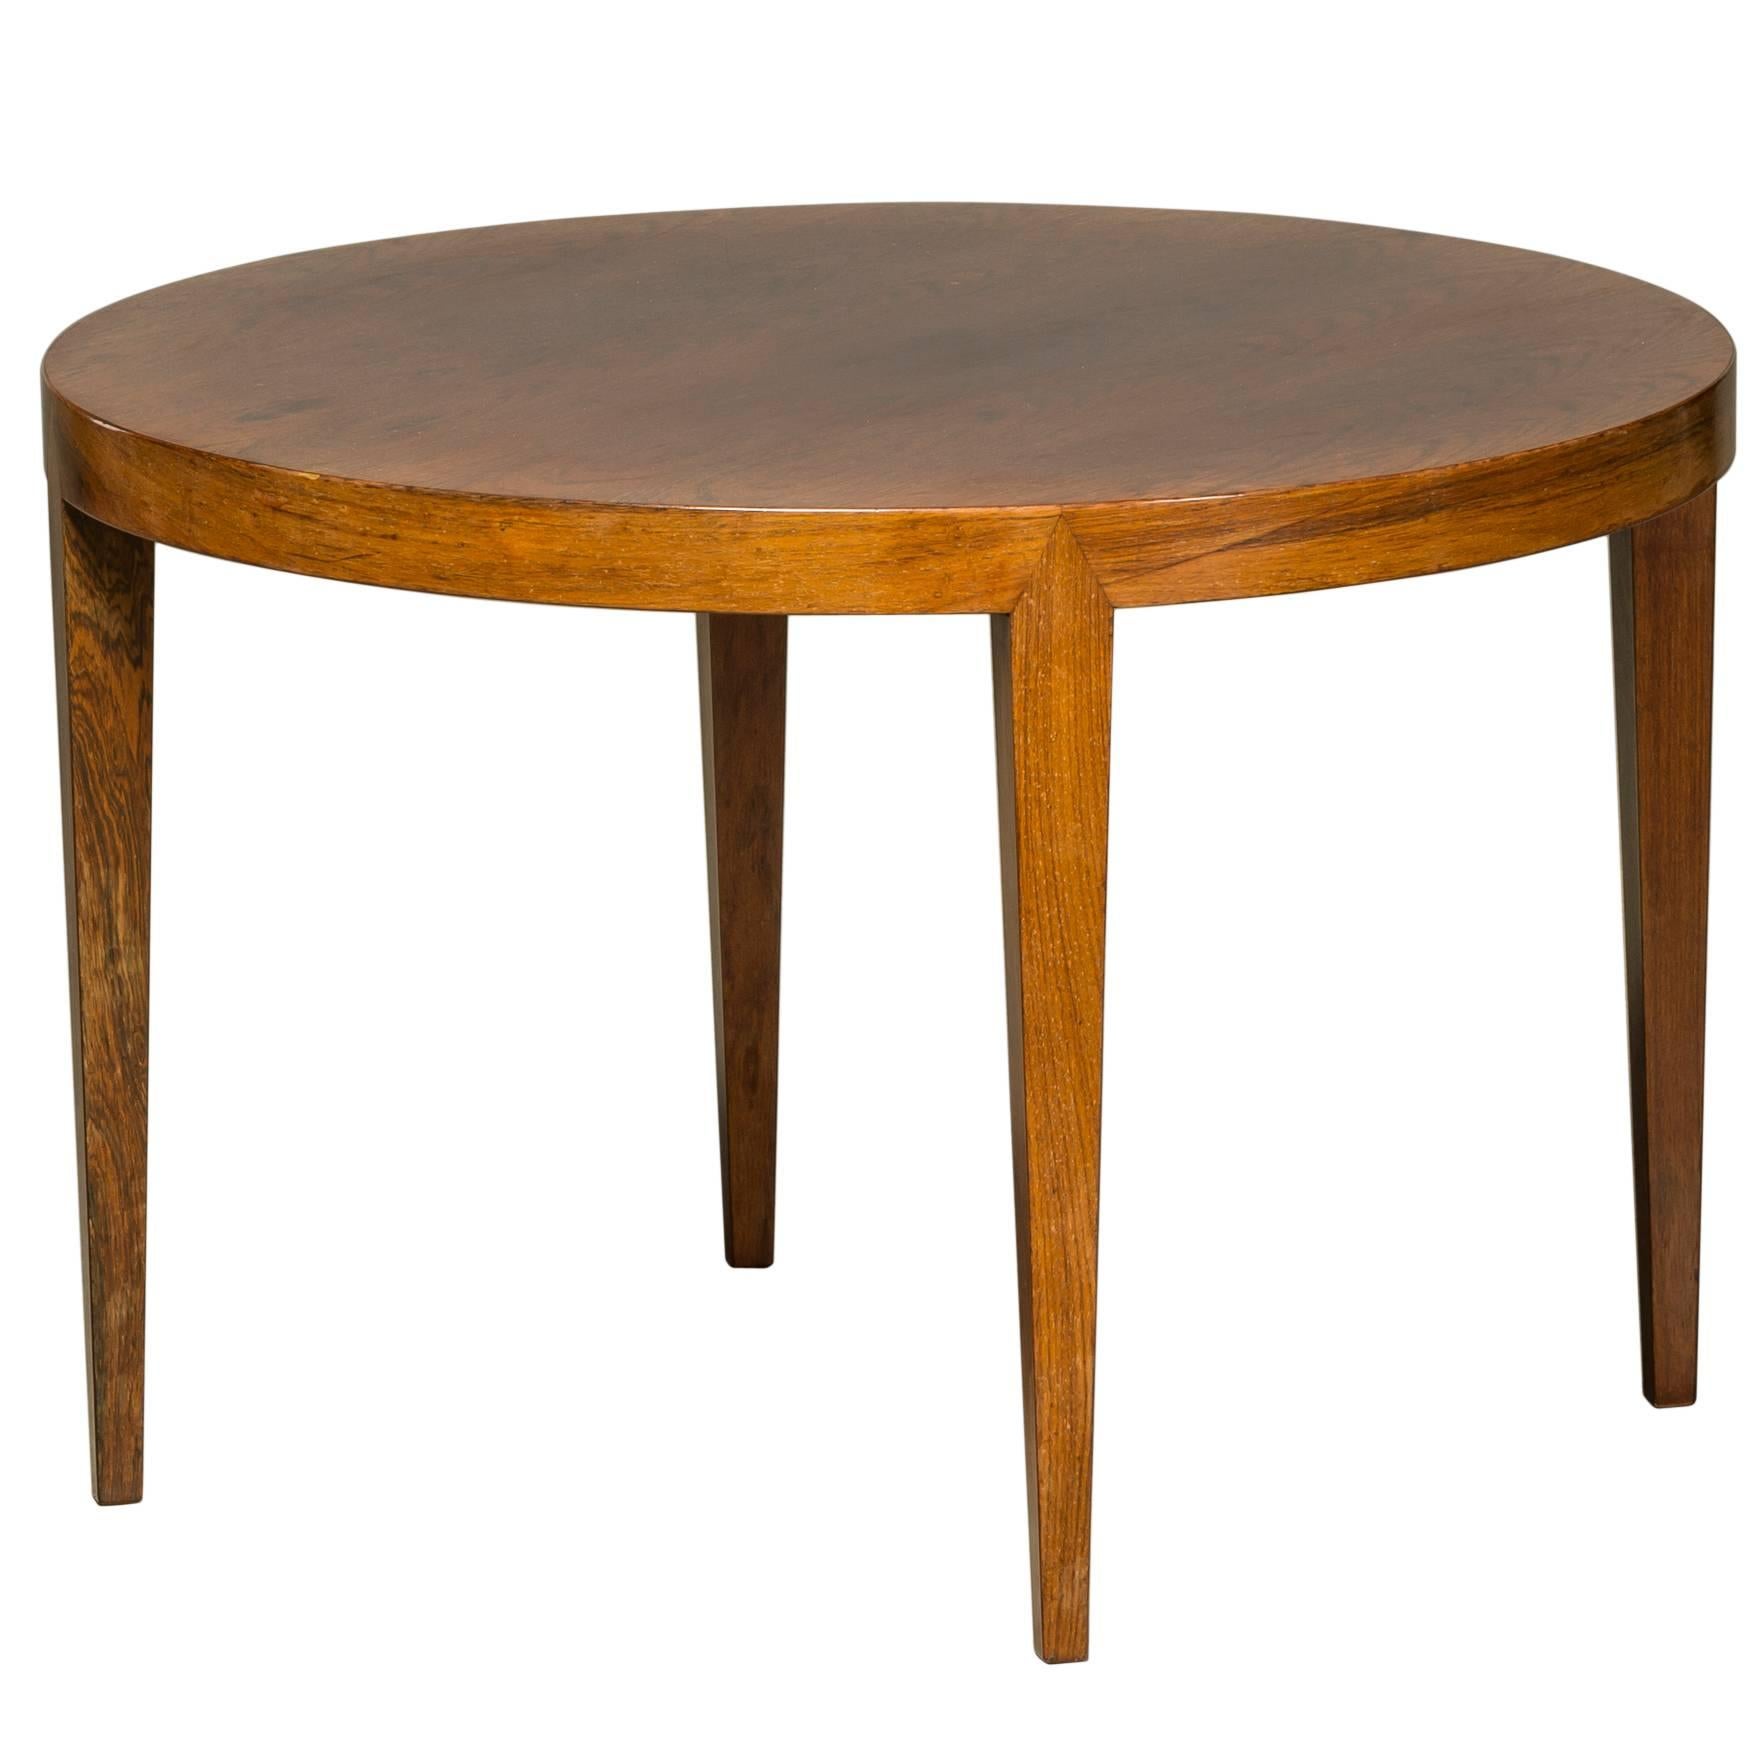 Mid-19th Century Coffee Table in Rosewood, Danish Design